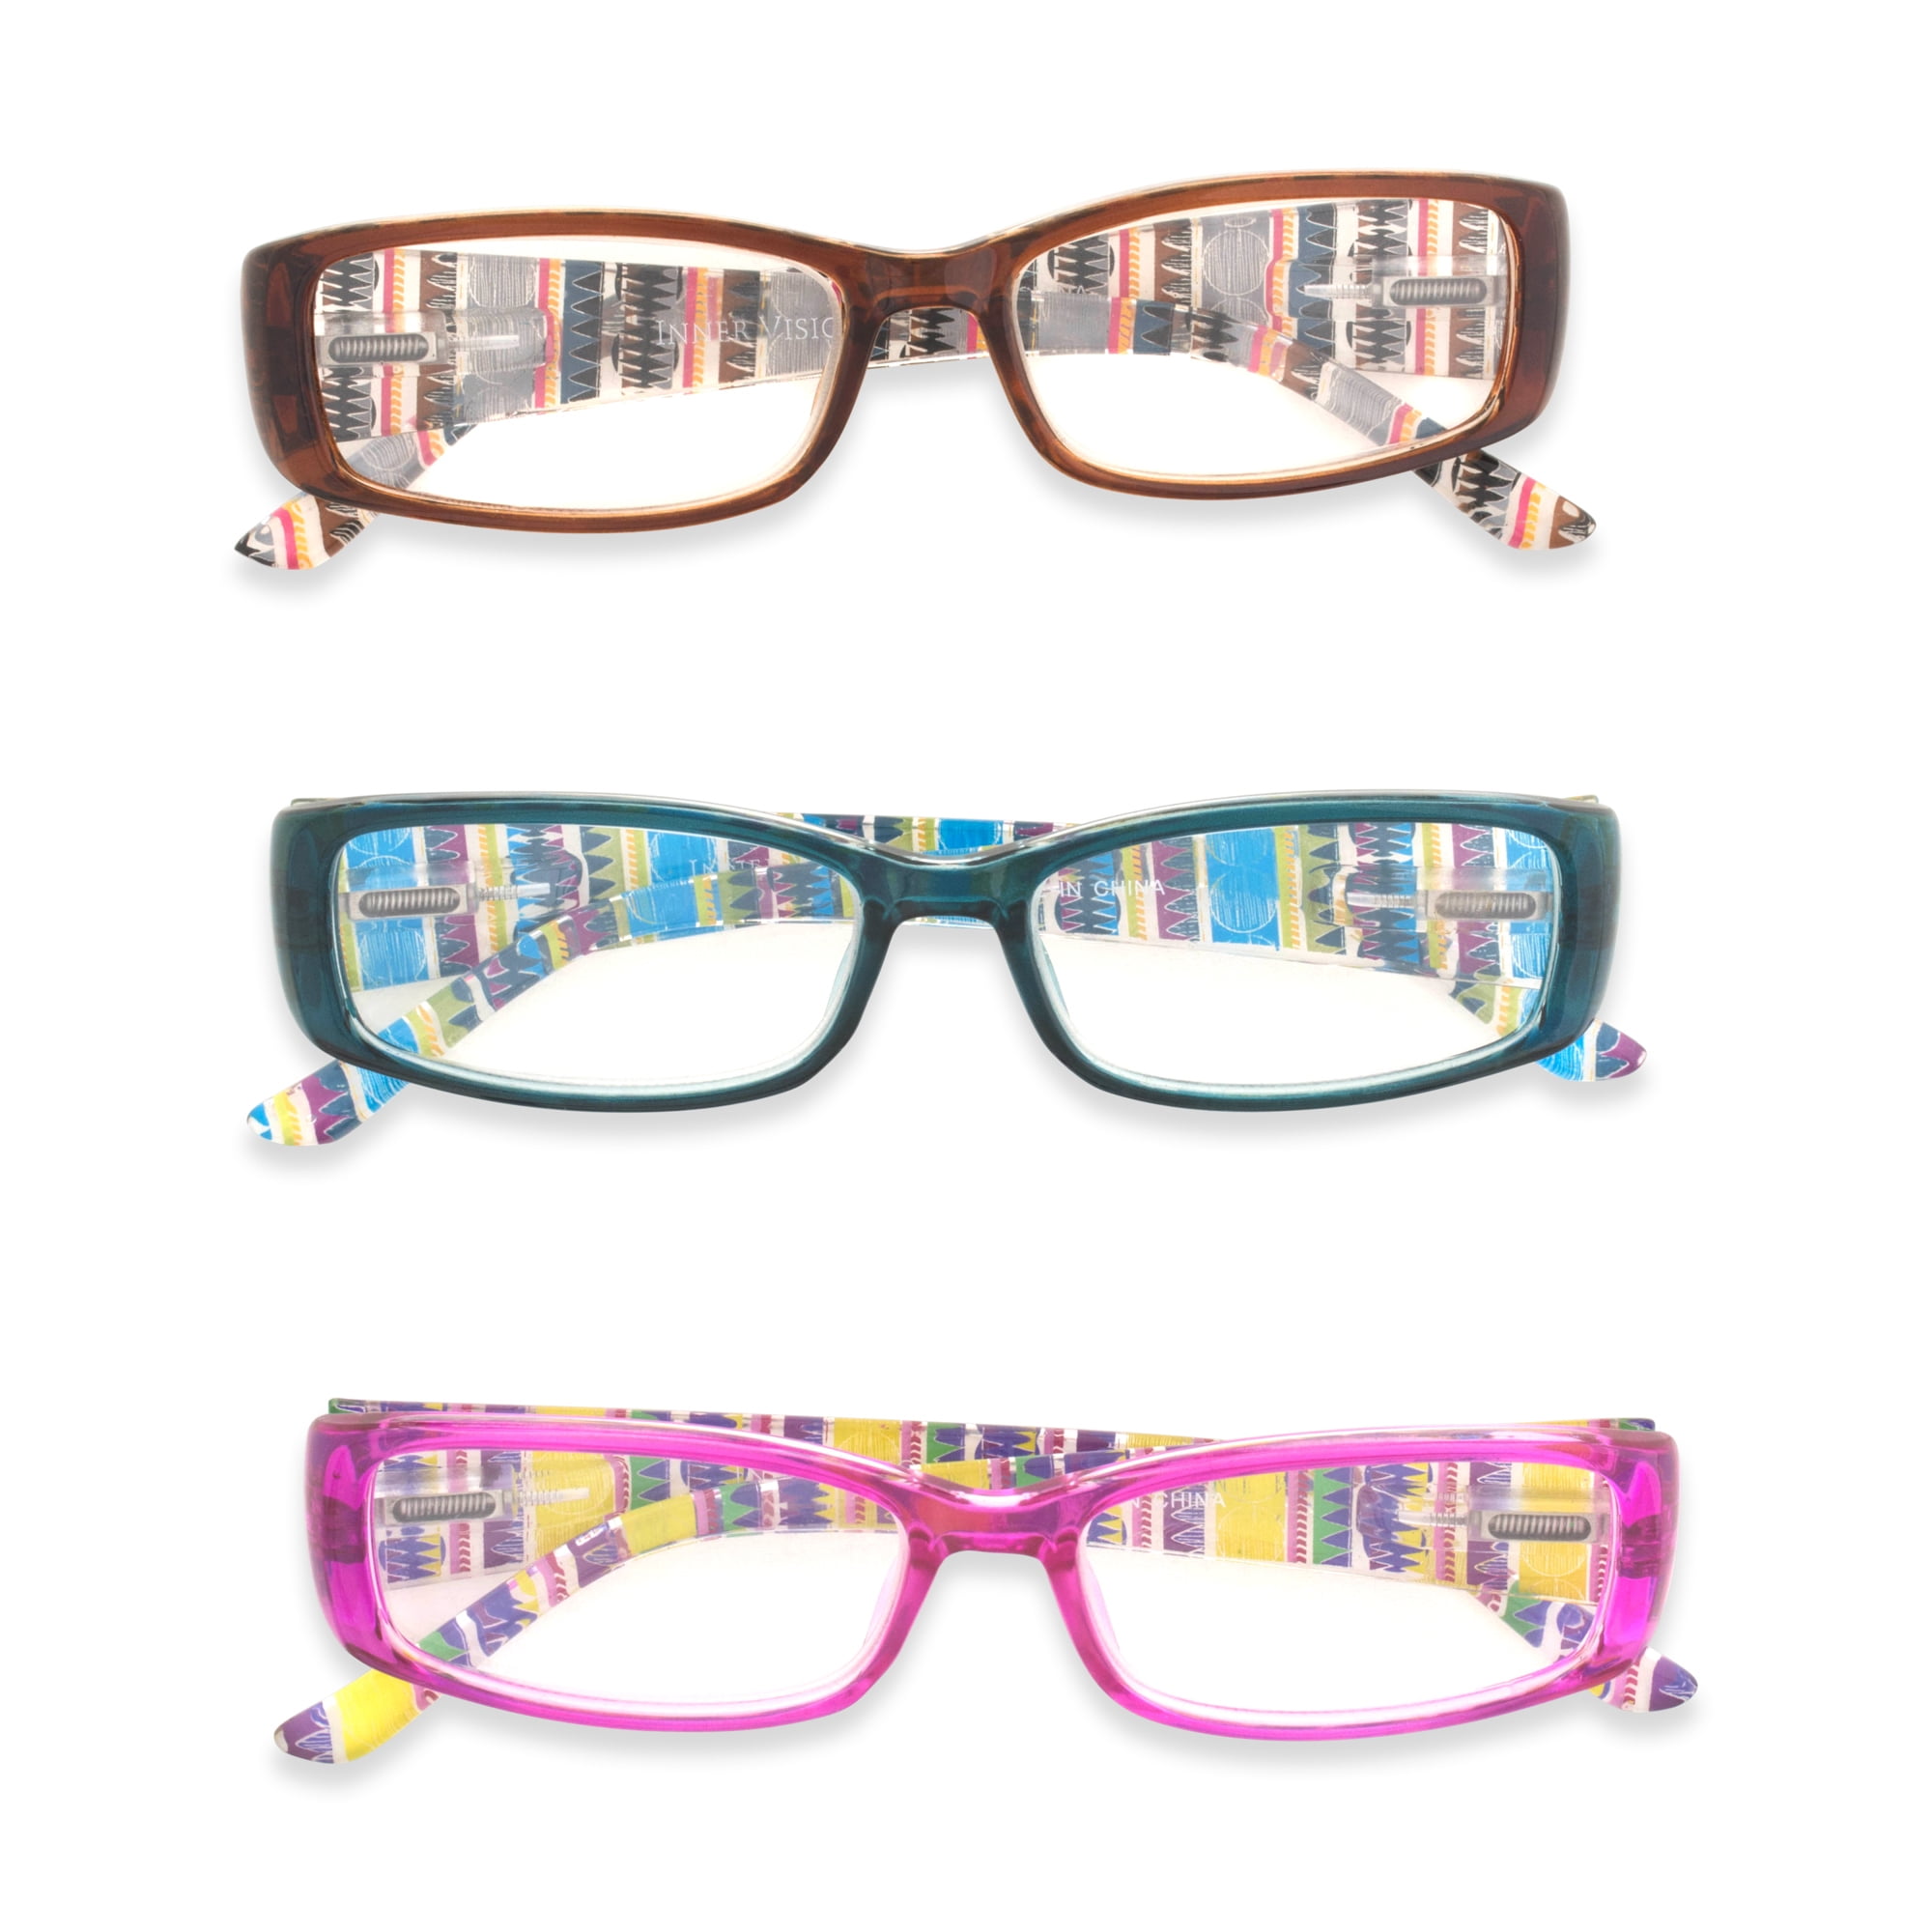 5 Pack Reading Glasses Fashion Ladies Readers Spring Hinge with Pattern Print Eyeglasses for Women（Pink,1.5） 